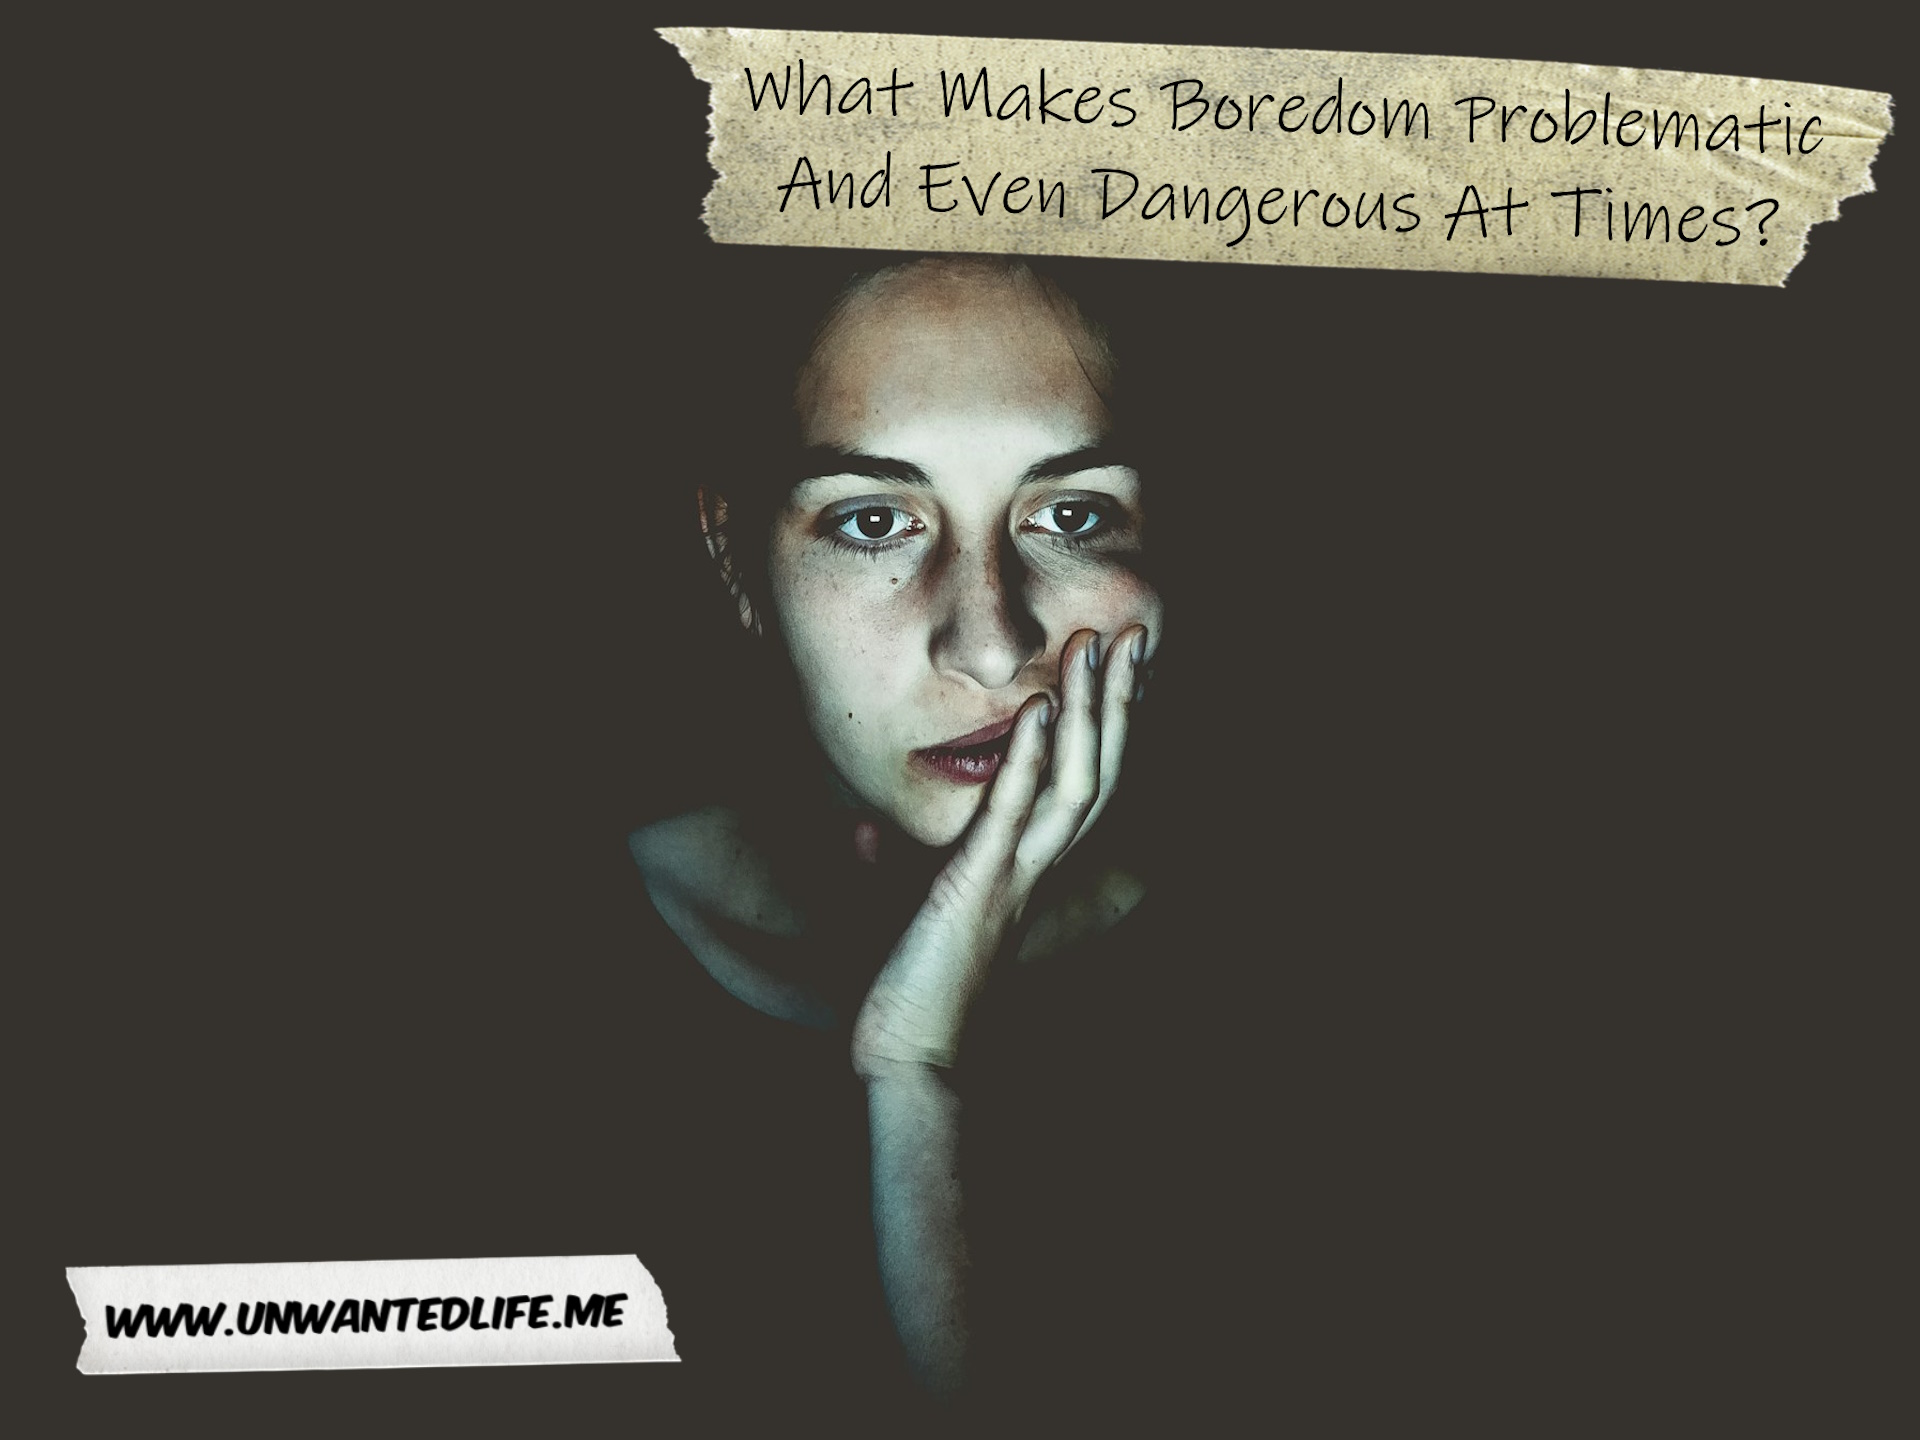 A photo of a woman sitting in the dark looking board to represent the topic of the article - What Makes Boredom Problematic And Even Dangerous At Times?